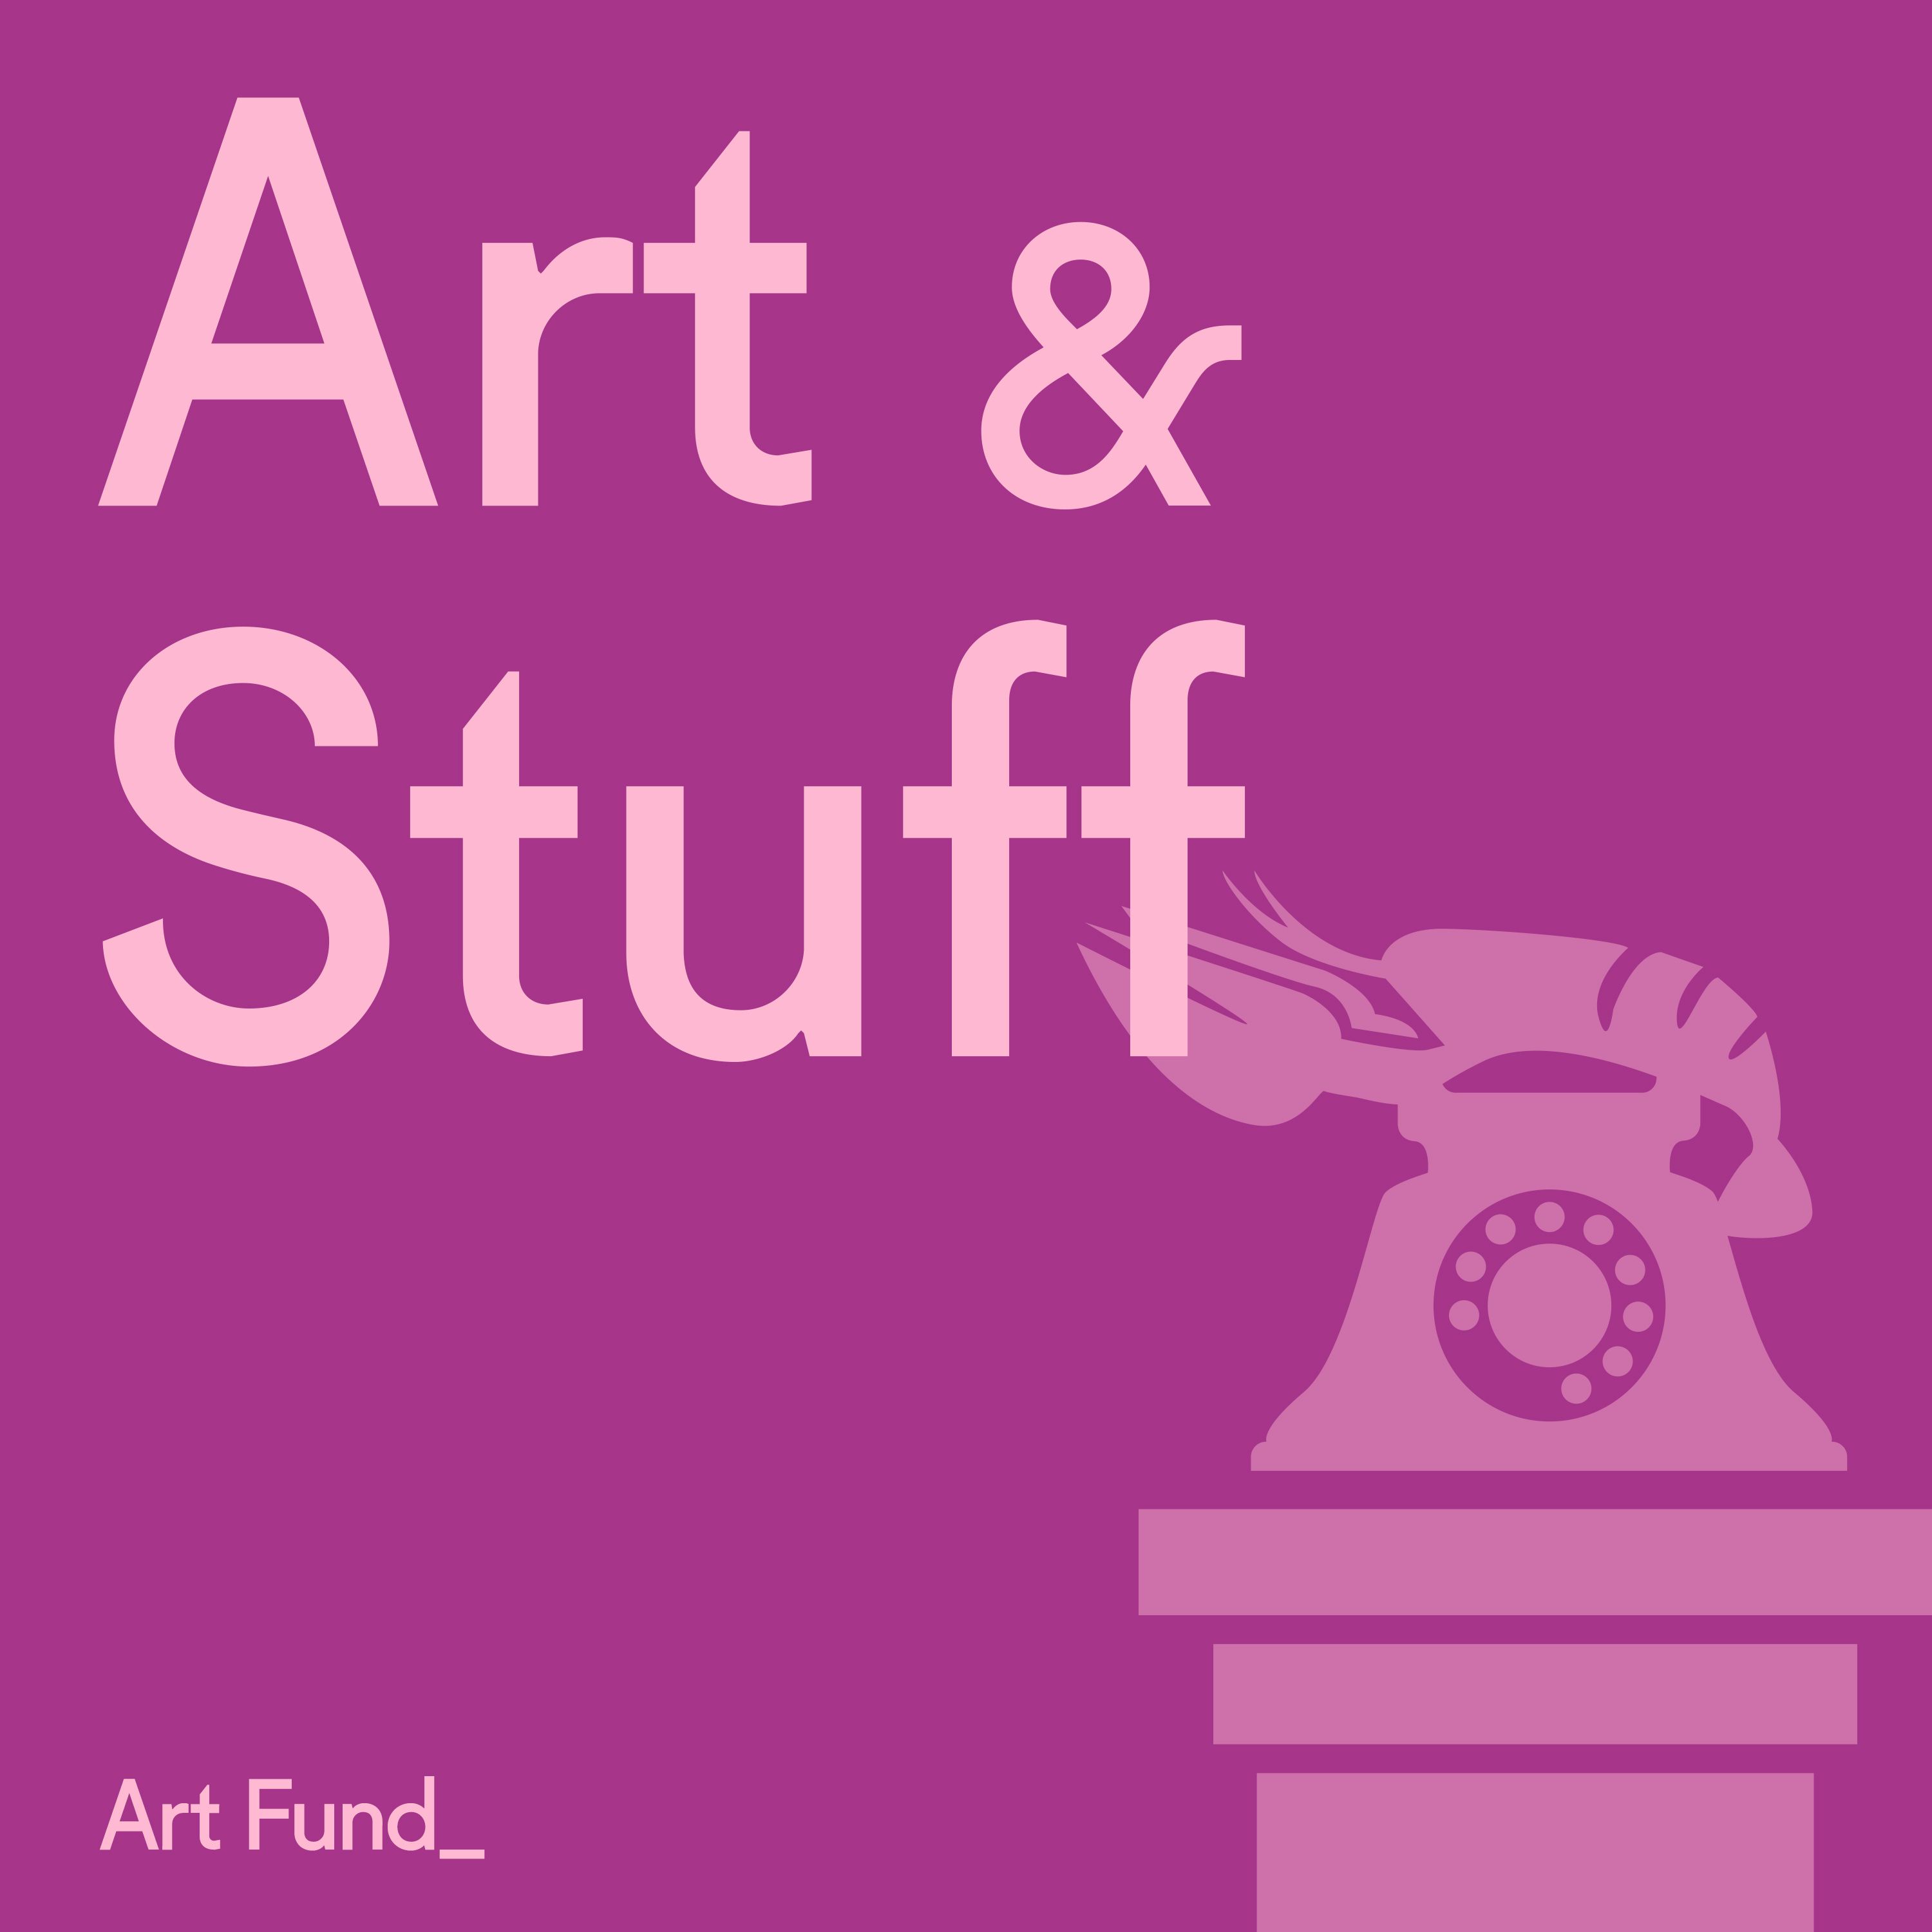 Introducing: Art and Stuff